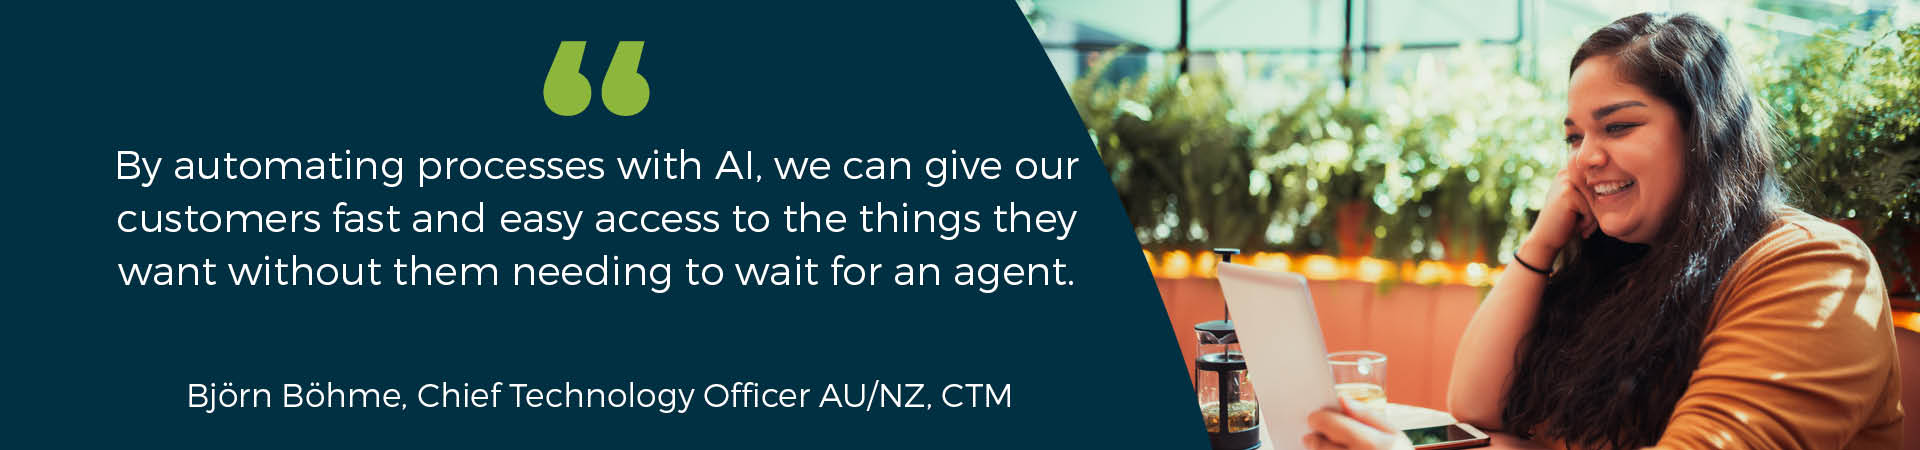 Banner - "By automating processes with AI, we can give our customers fast and easy access to the things they want without them needing to wait for an agent" - Bjorn Bohme quote